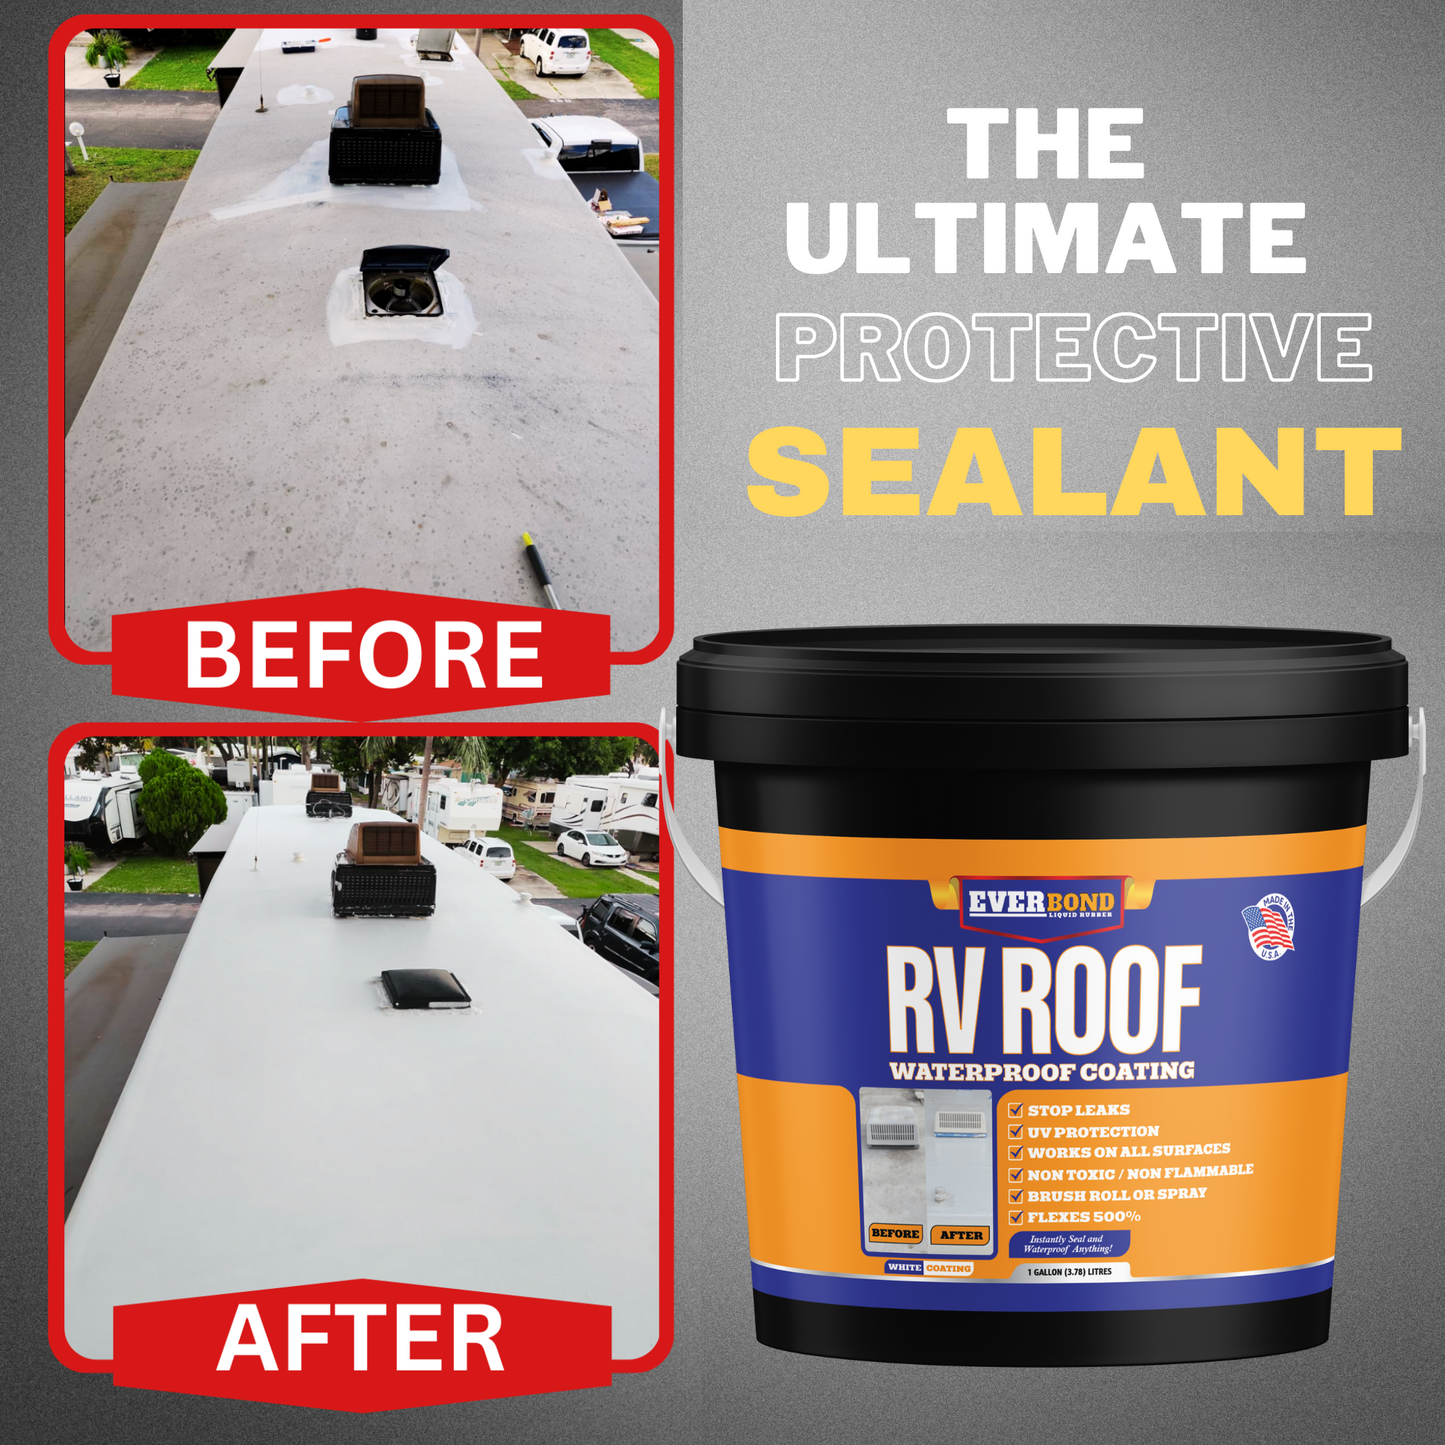 EverBond RV Roof Waterproof Coatings - RV Roof Sealant - Solar Reflective Sealant, for Trailers, Campers, Roof Repairs, and Leak Repairs. Easy to Apply Titanium White 4.75 Gallon Pail